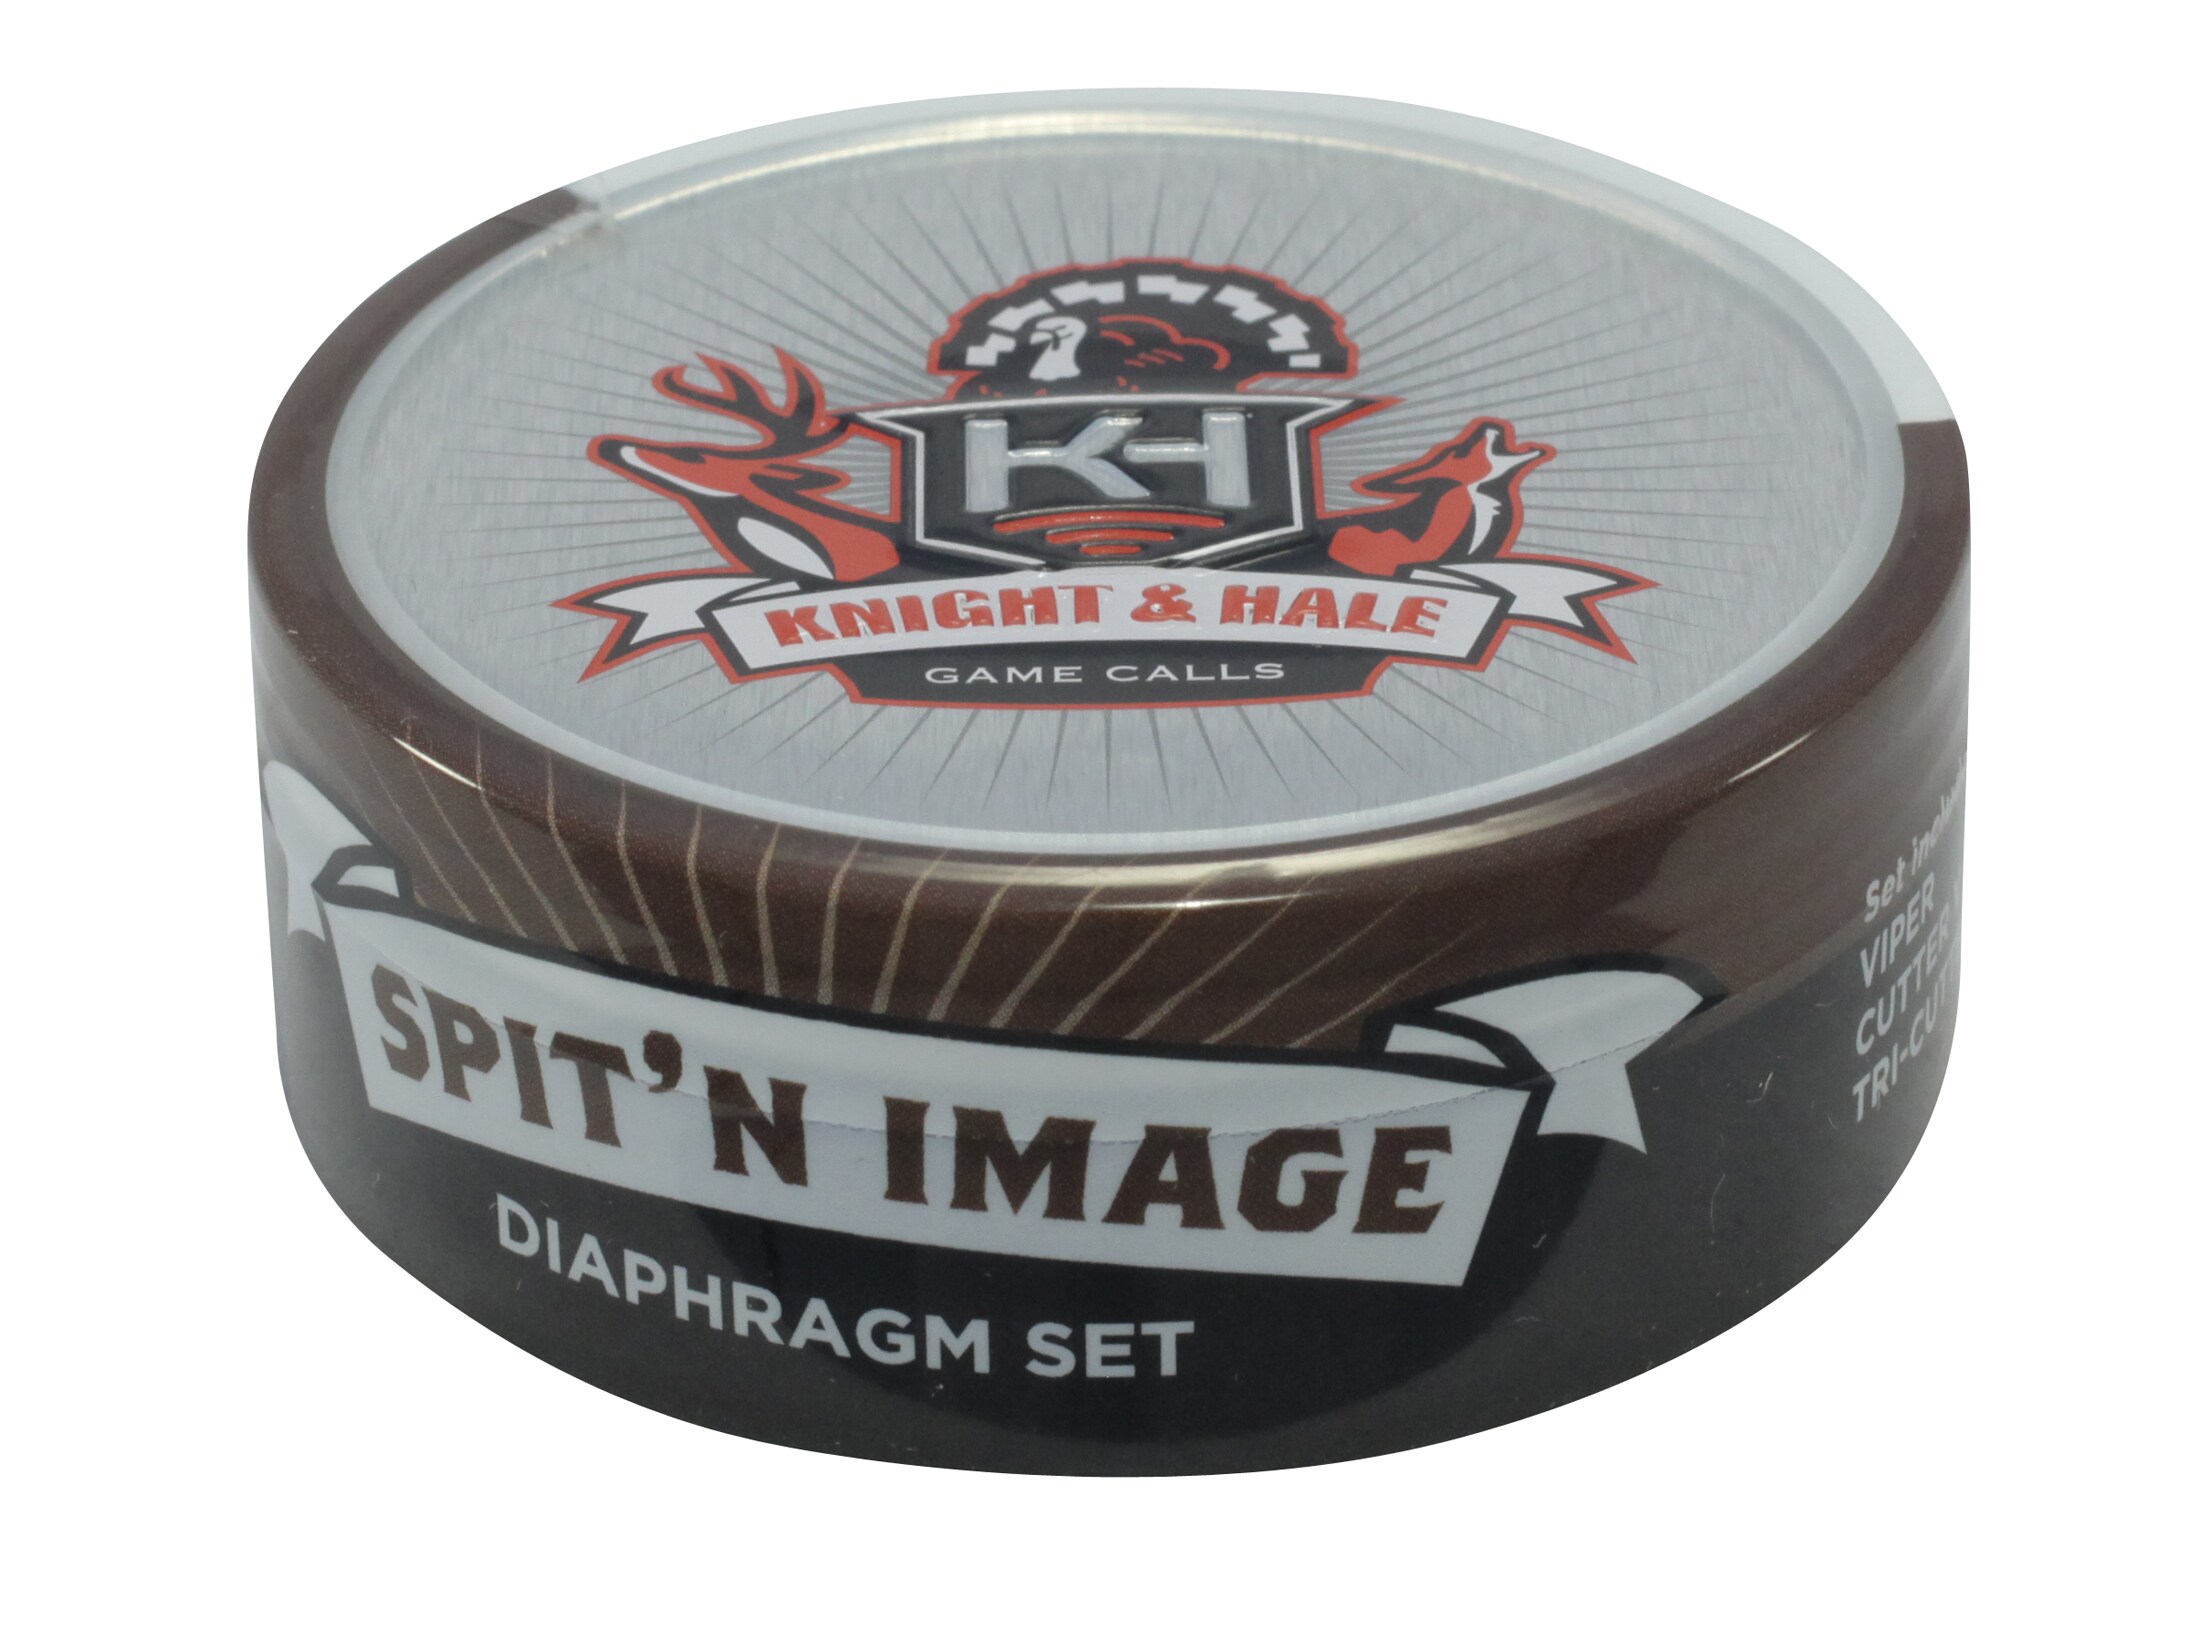 Knight & Hale Spit'N Image Viper Diaphragm Call 